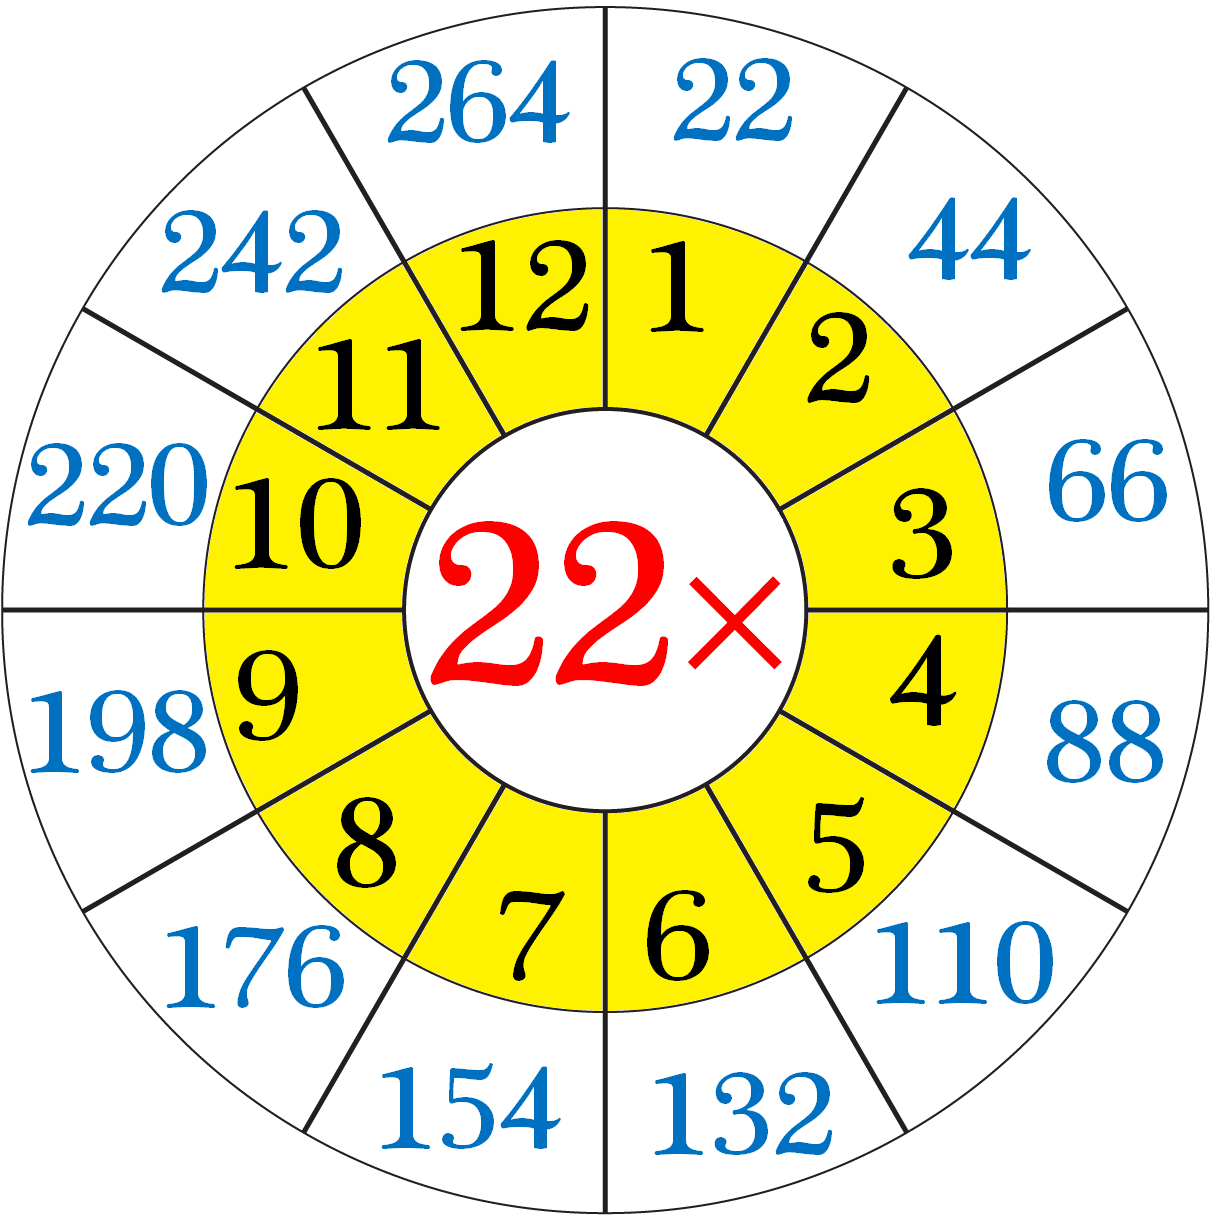 multiplication-table-of-22-read-and-write-the-table-of-22-22-times